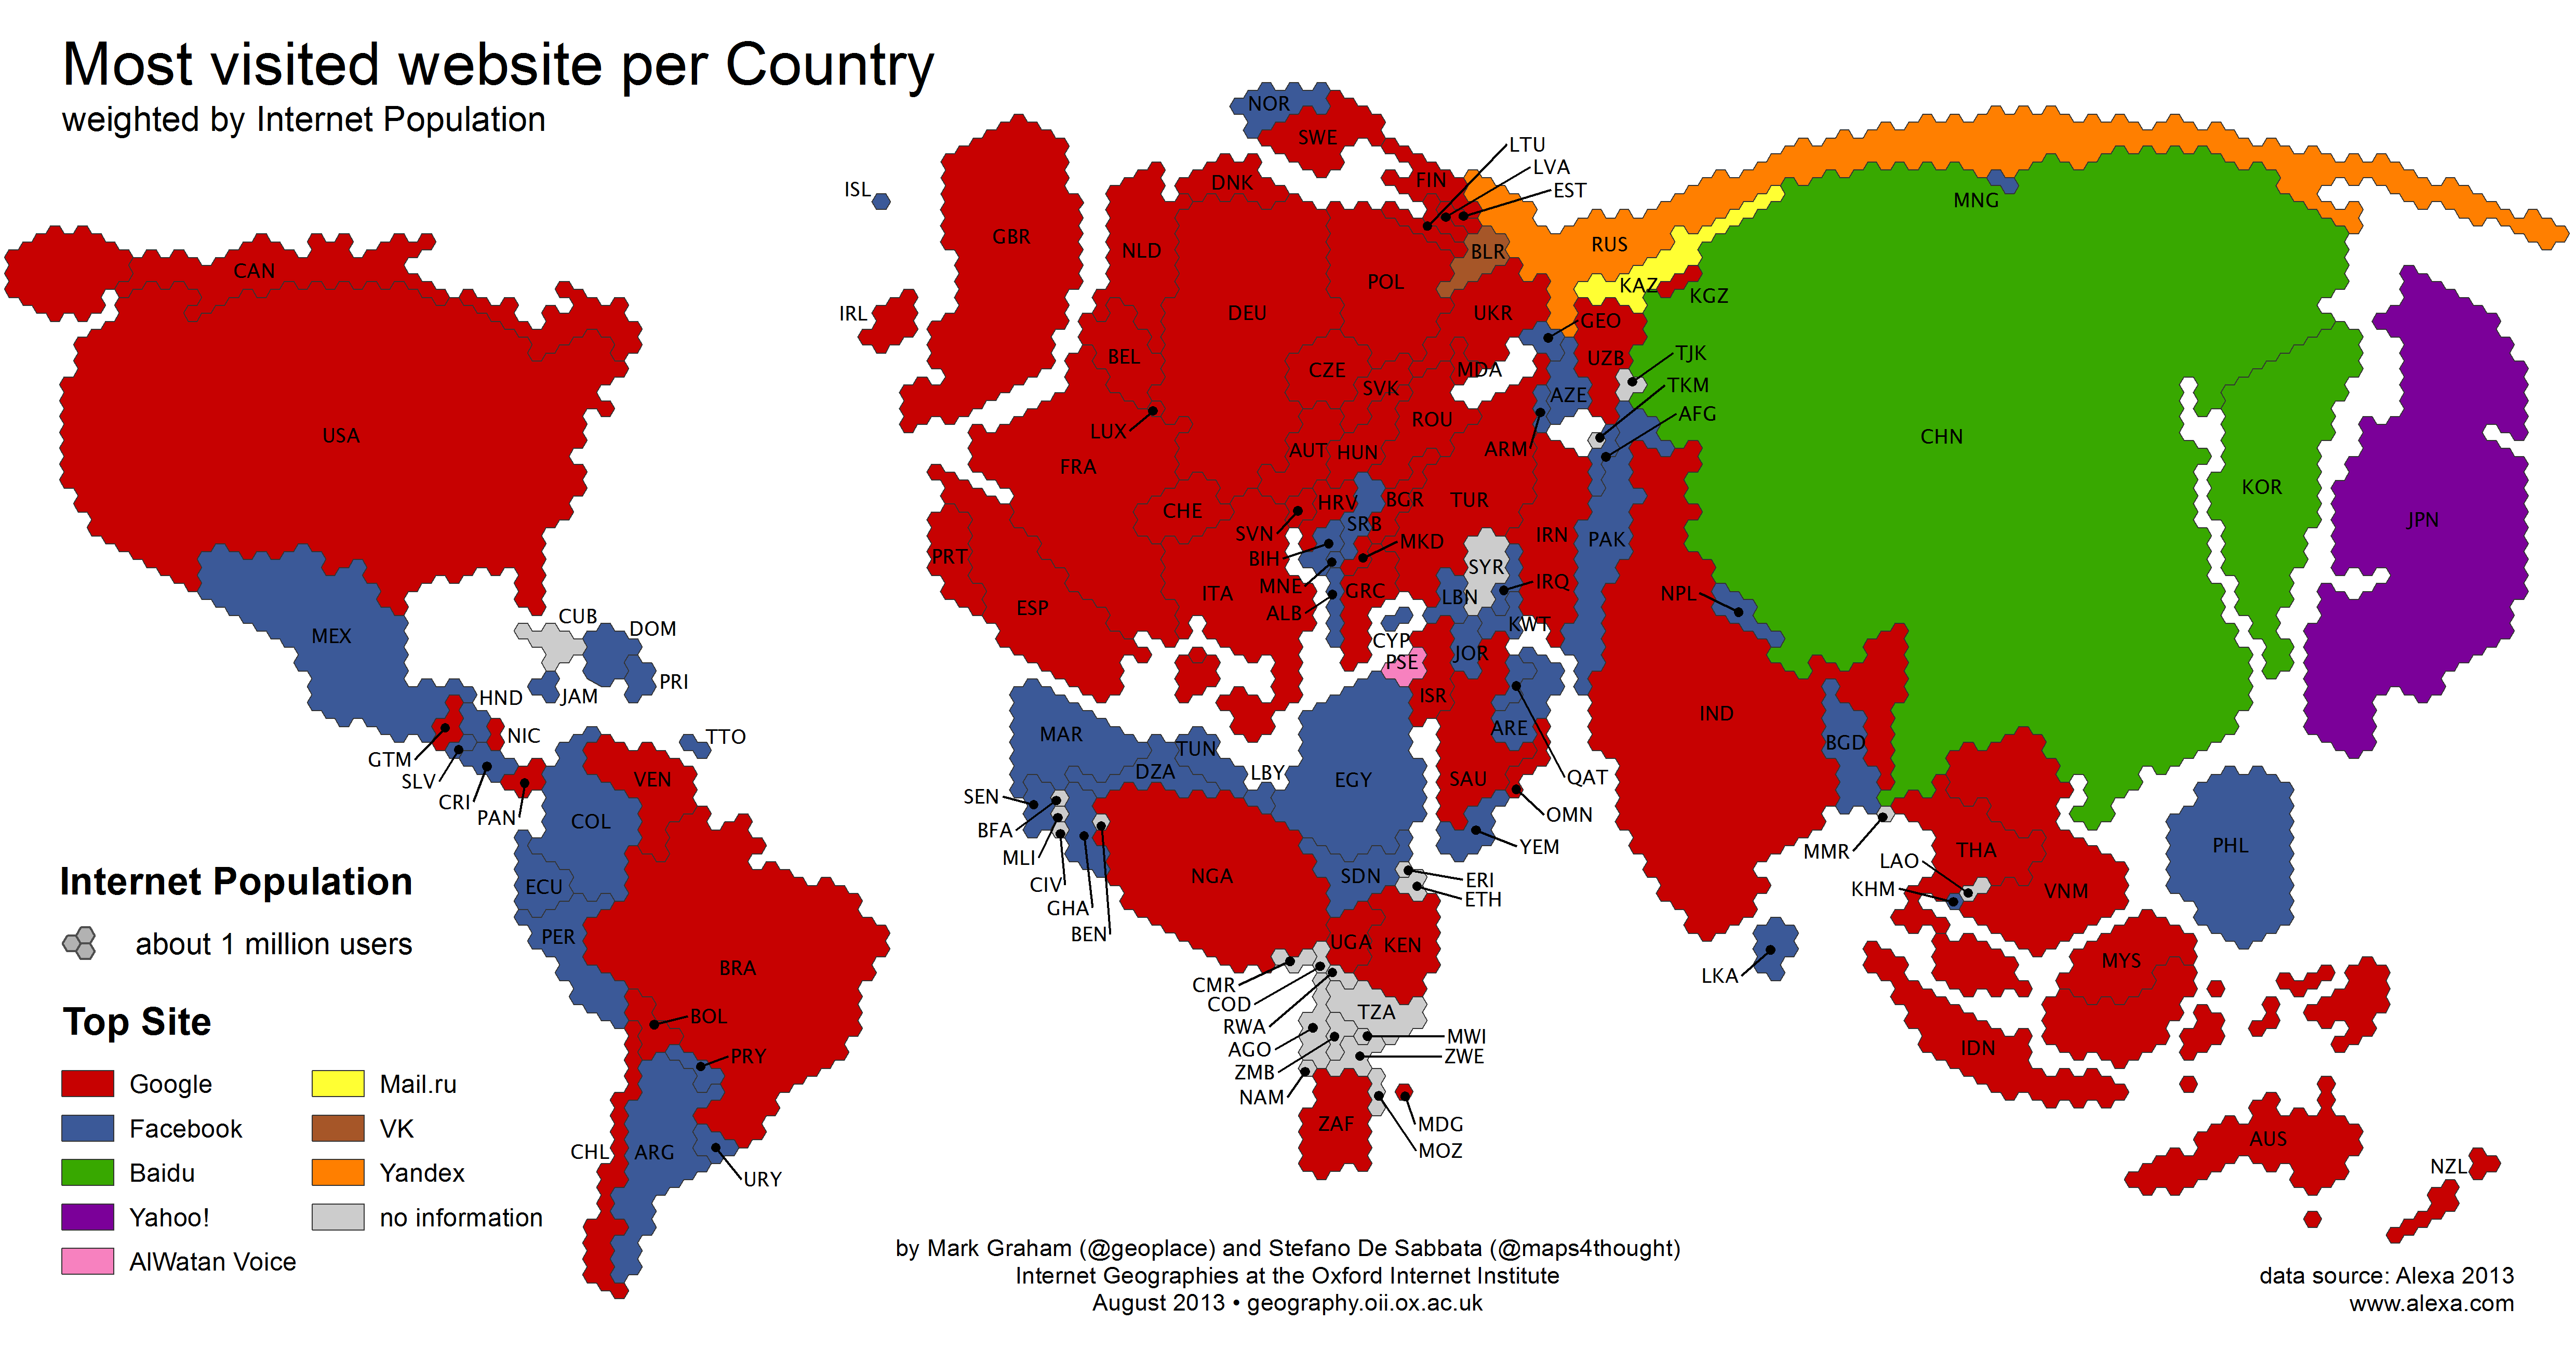 A map of the most visited website, by country.